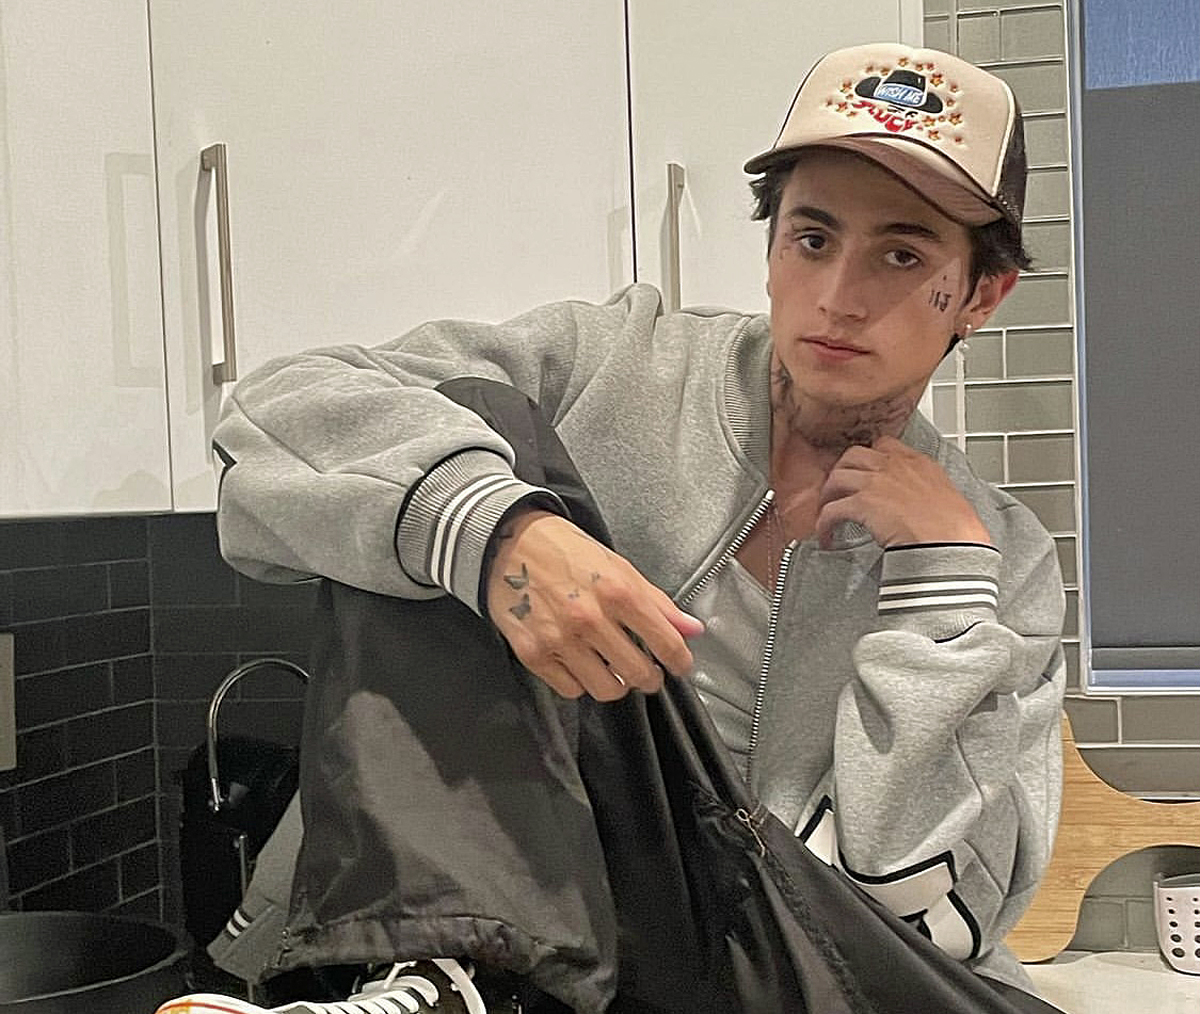 TikTok Star Cooper Noriega Dead At 19 -- Found Hours After Post About Dying Young